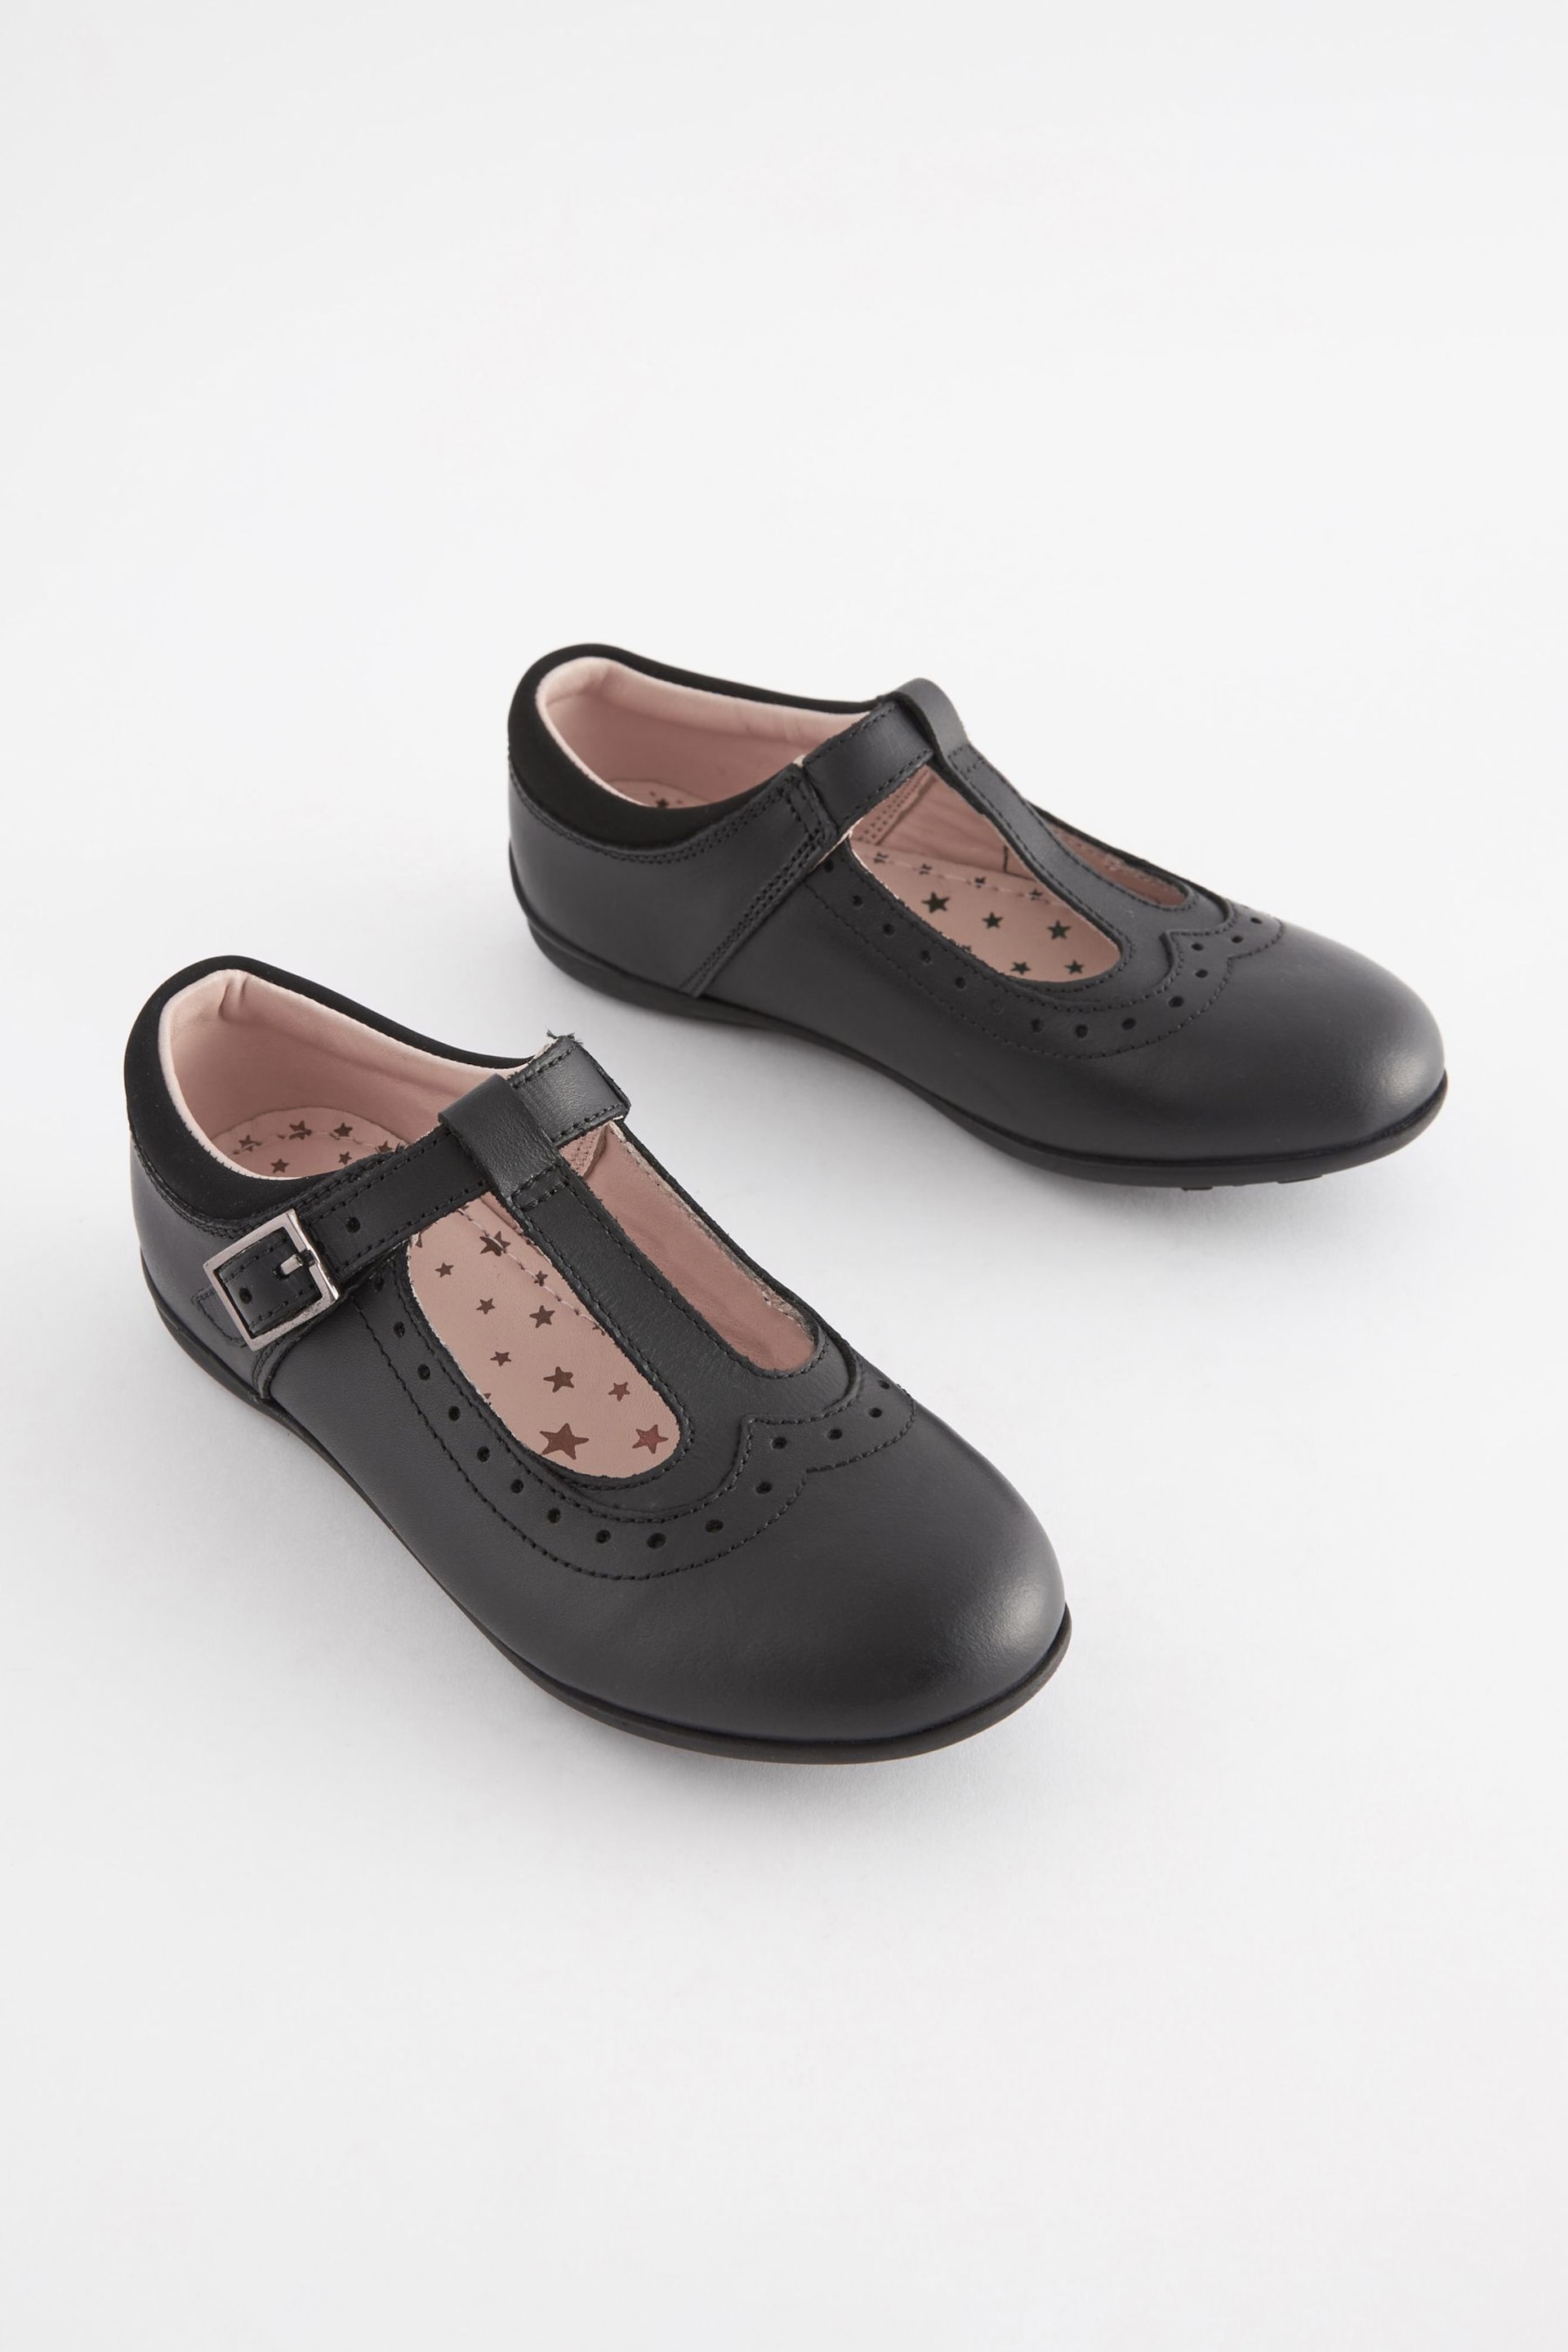 Black Wide Fit (G) Leather T-Bar Leather Shoes - Image 1 of 5